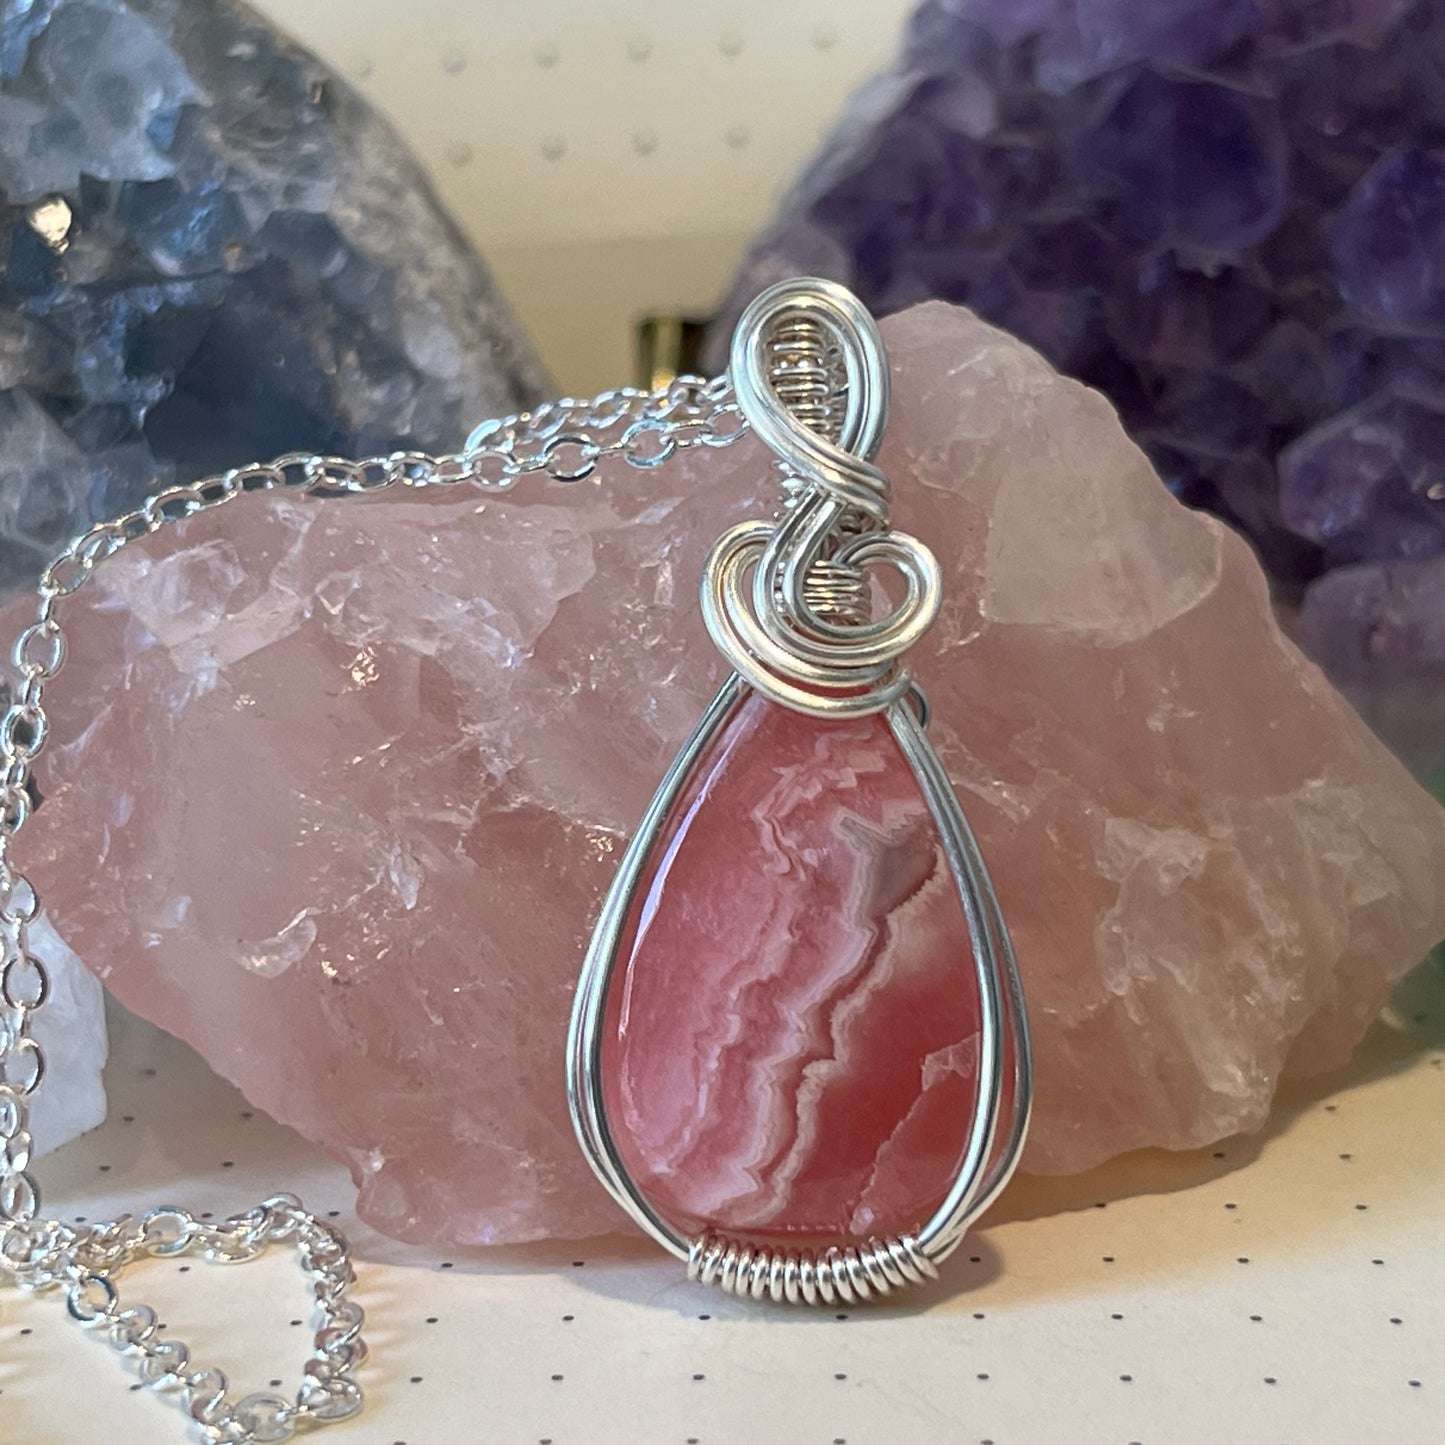 Rhodocrosite Necklace, Wire Wrapped Crystal Pendant with Chain,  Healing Trauma ~ Worthiness ~ Self-Love & Compassion